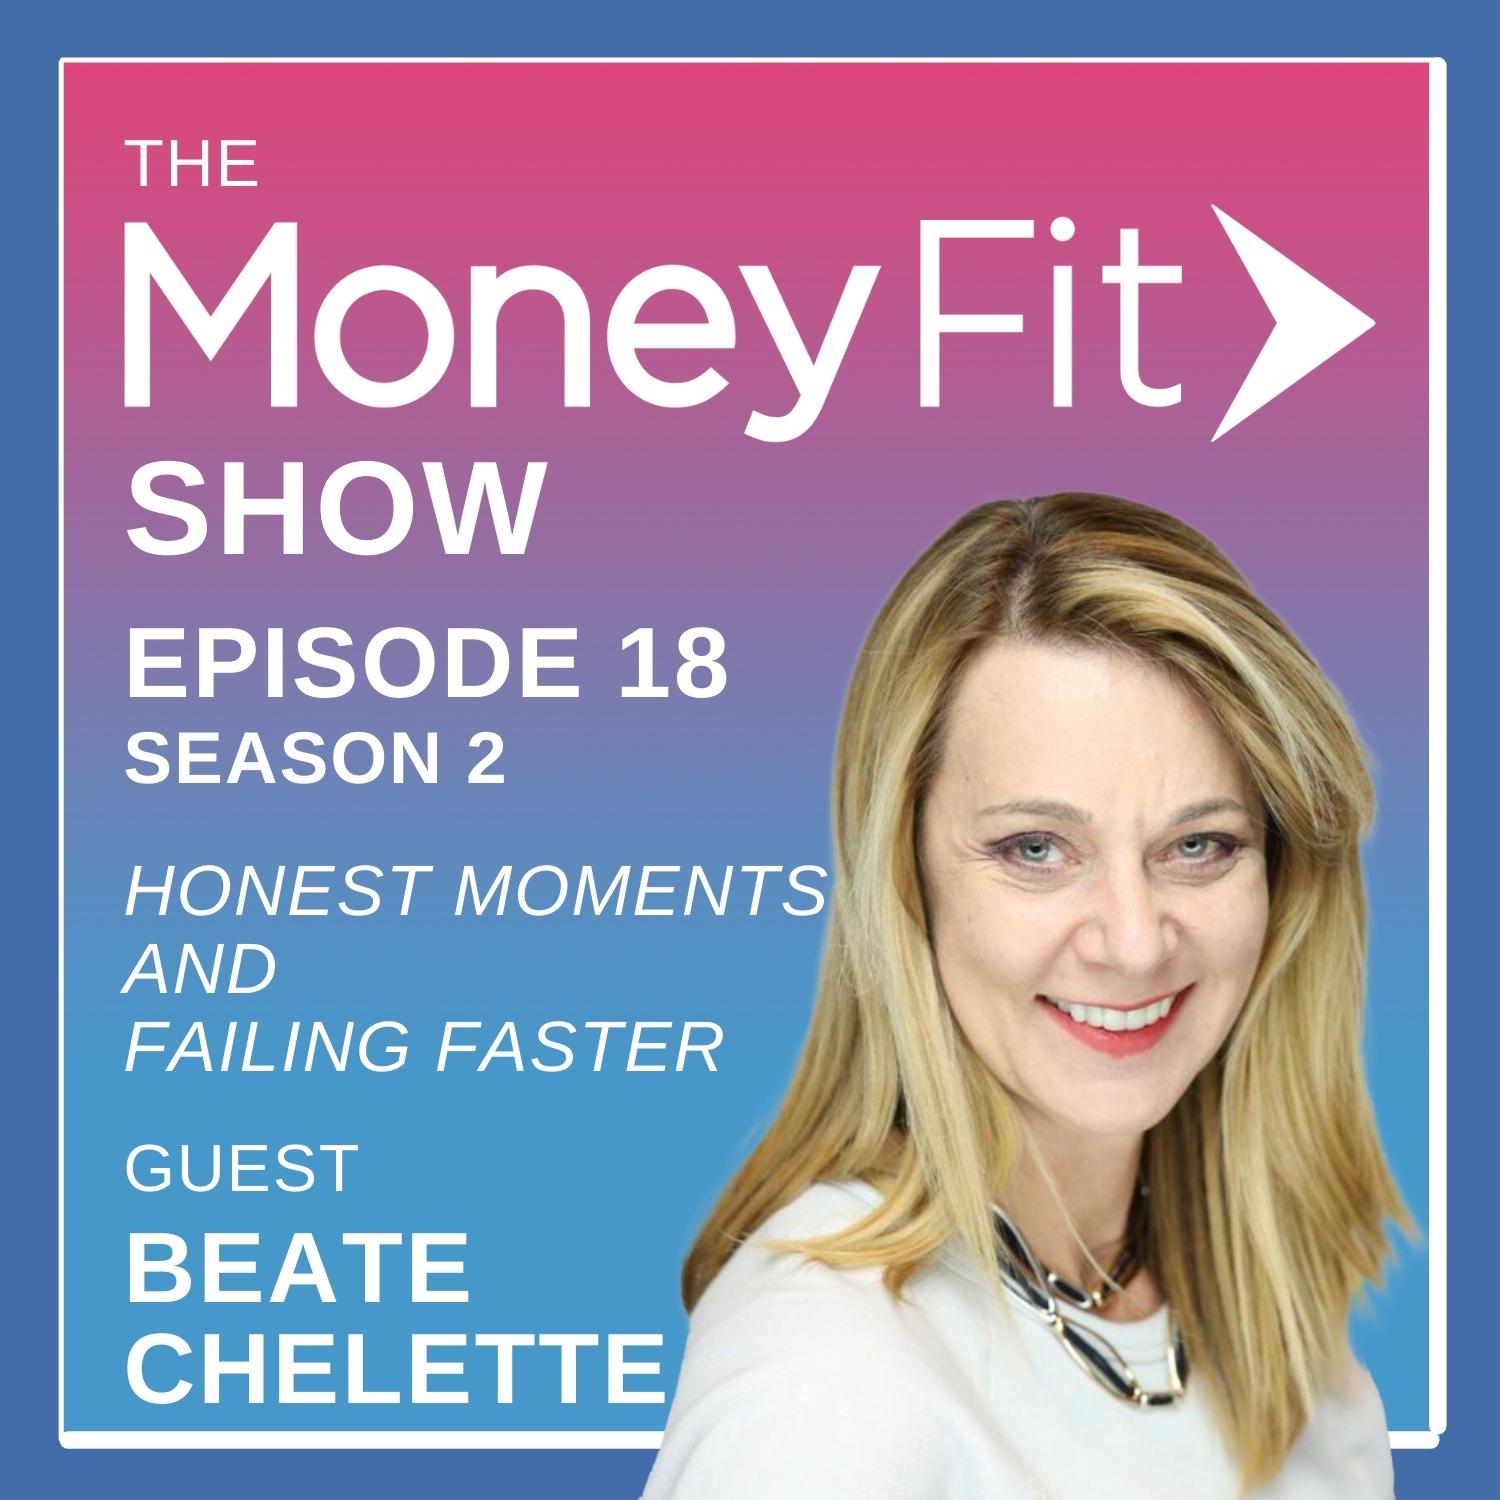 Honest Moments and Failing Faster, Beate Chelette, Author of The Women’s Code